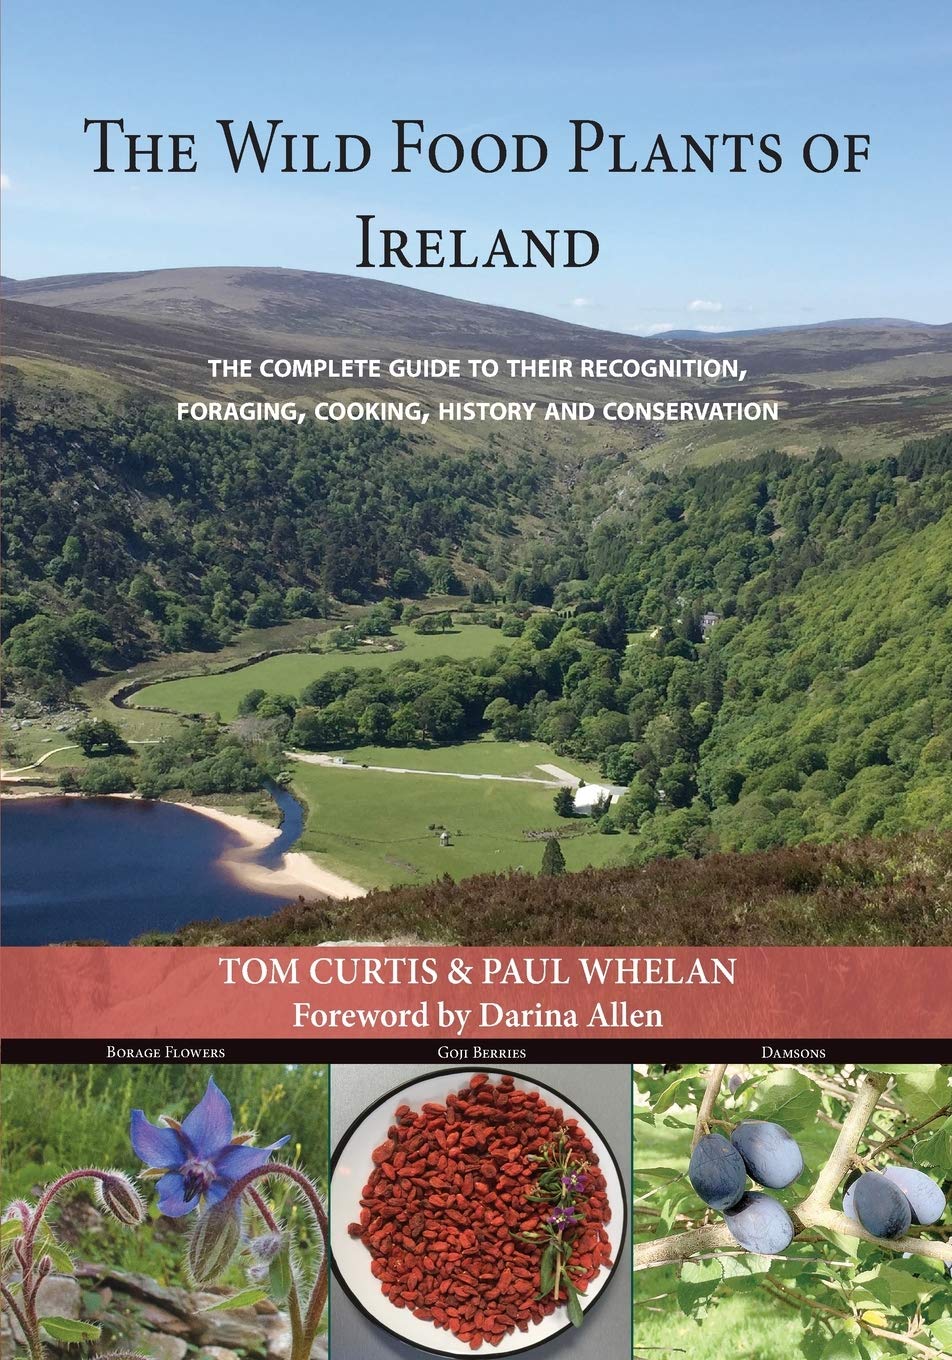 The Wild Food Plants of Ireland The Complete Guide to Their Recognition Foraging Cooking History and Conservation by Tom Curtis and Paul Whelan Foreward by Darina Allen